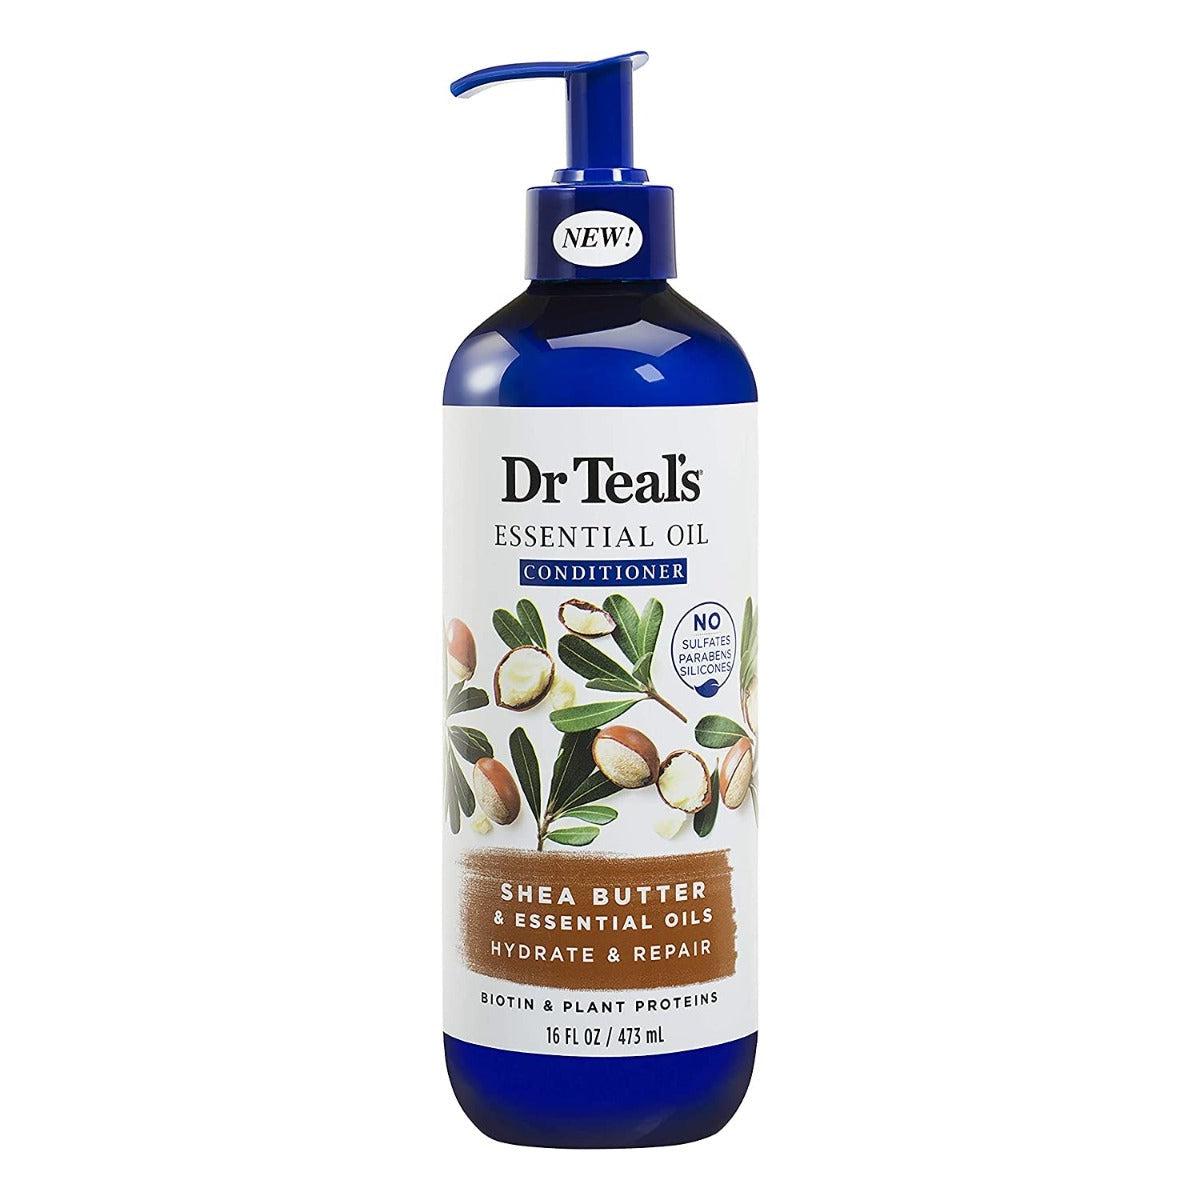 Dr. Teal's Shampoo Shea Butter & Essential Oil Hydrate & Repair No Sulfates No Parabens No Silicones